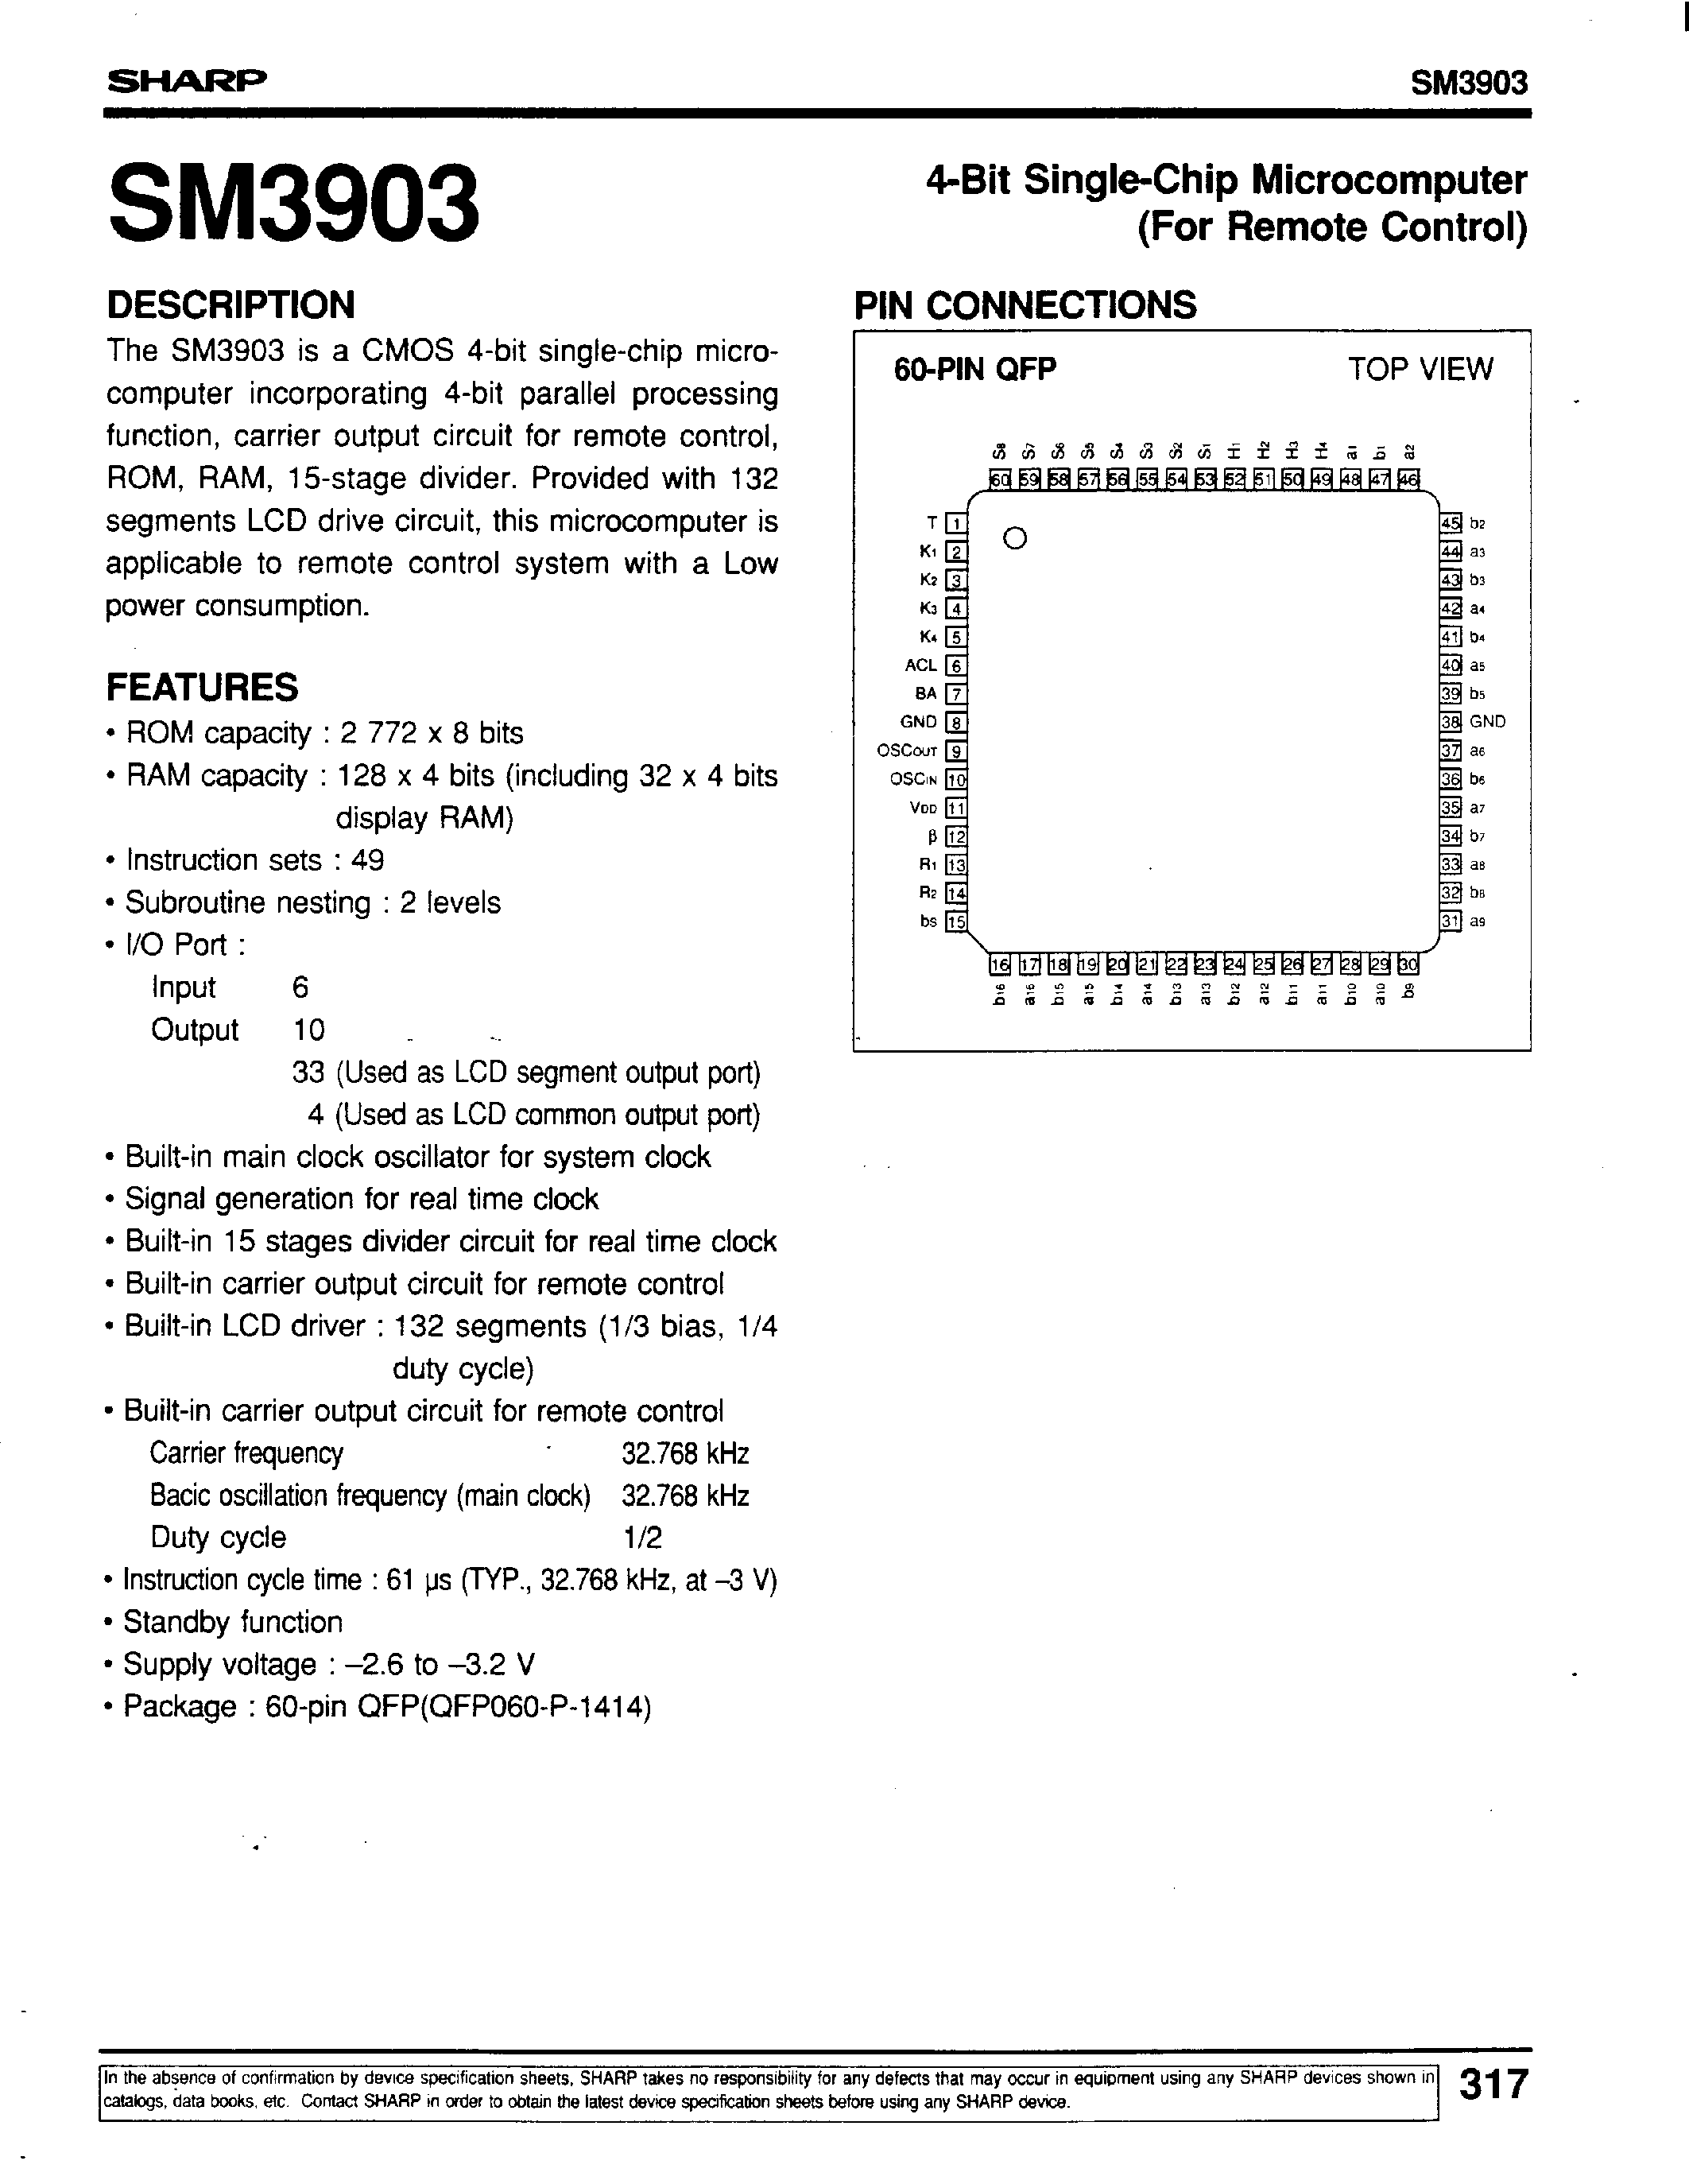 Datasheet SM3903 - 4-Bit Single-Chip Microcomputer(For Remote Control) page 1